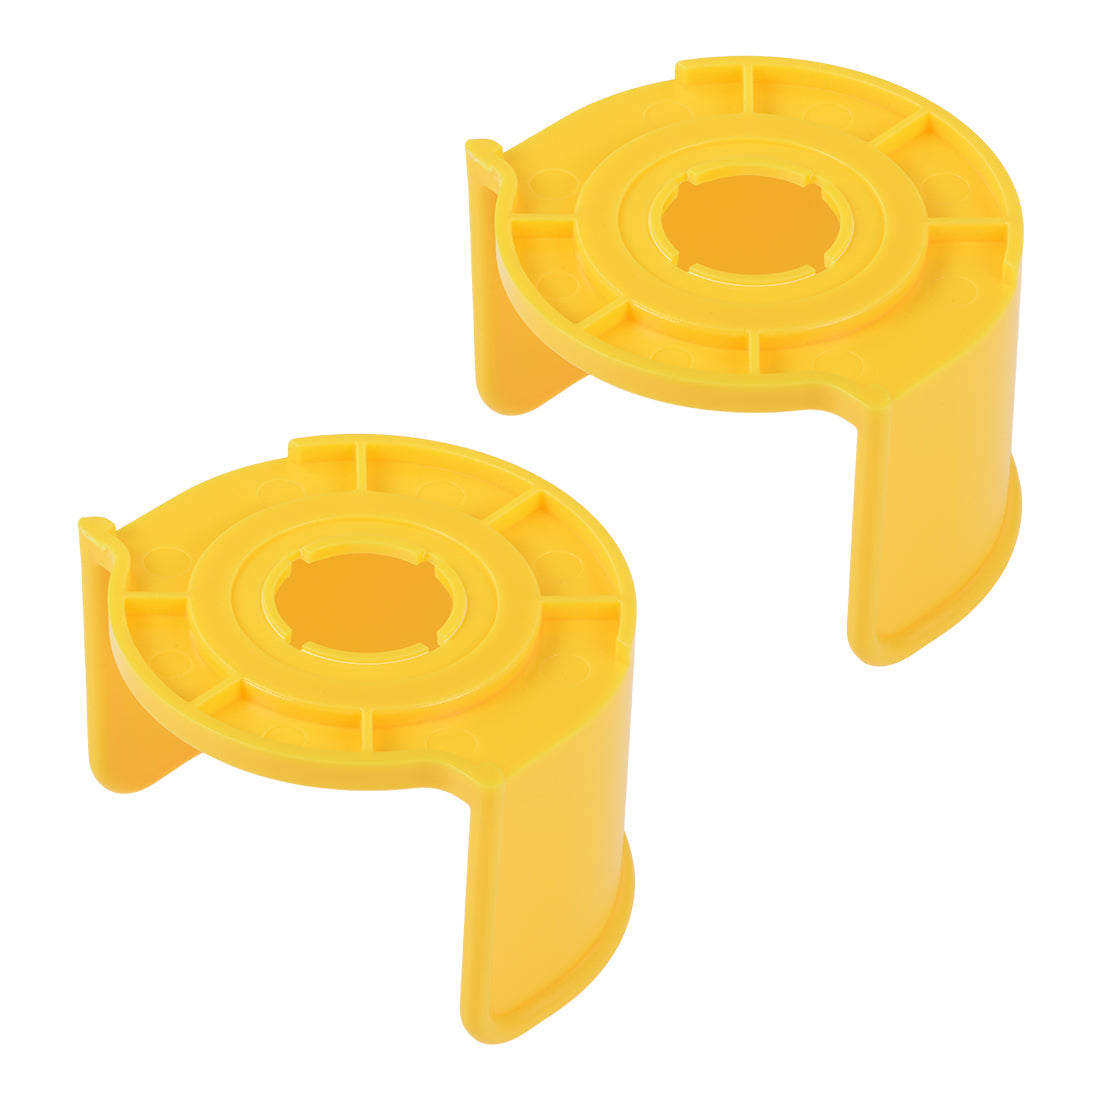 Uxcell Uxcell 22mm Plastic Half Circle Emergency Stop Switch Push Button Protective Cover Yellow 72x72x48mm 2pcs